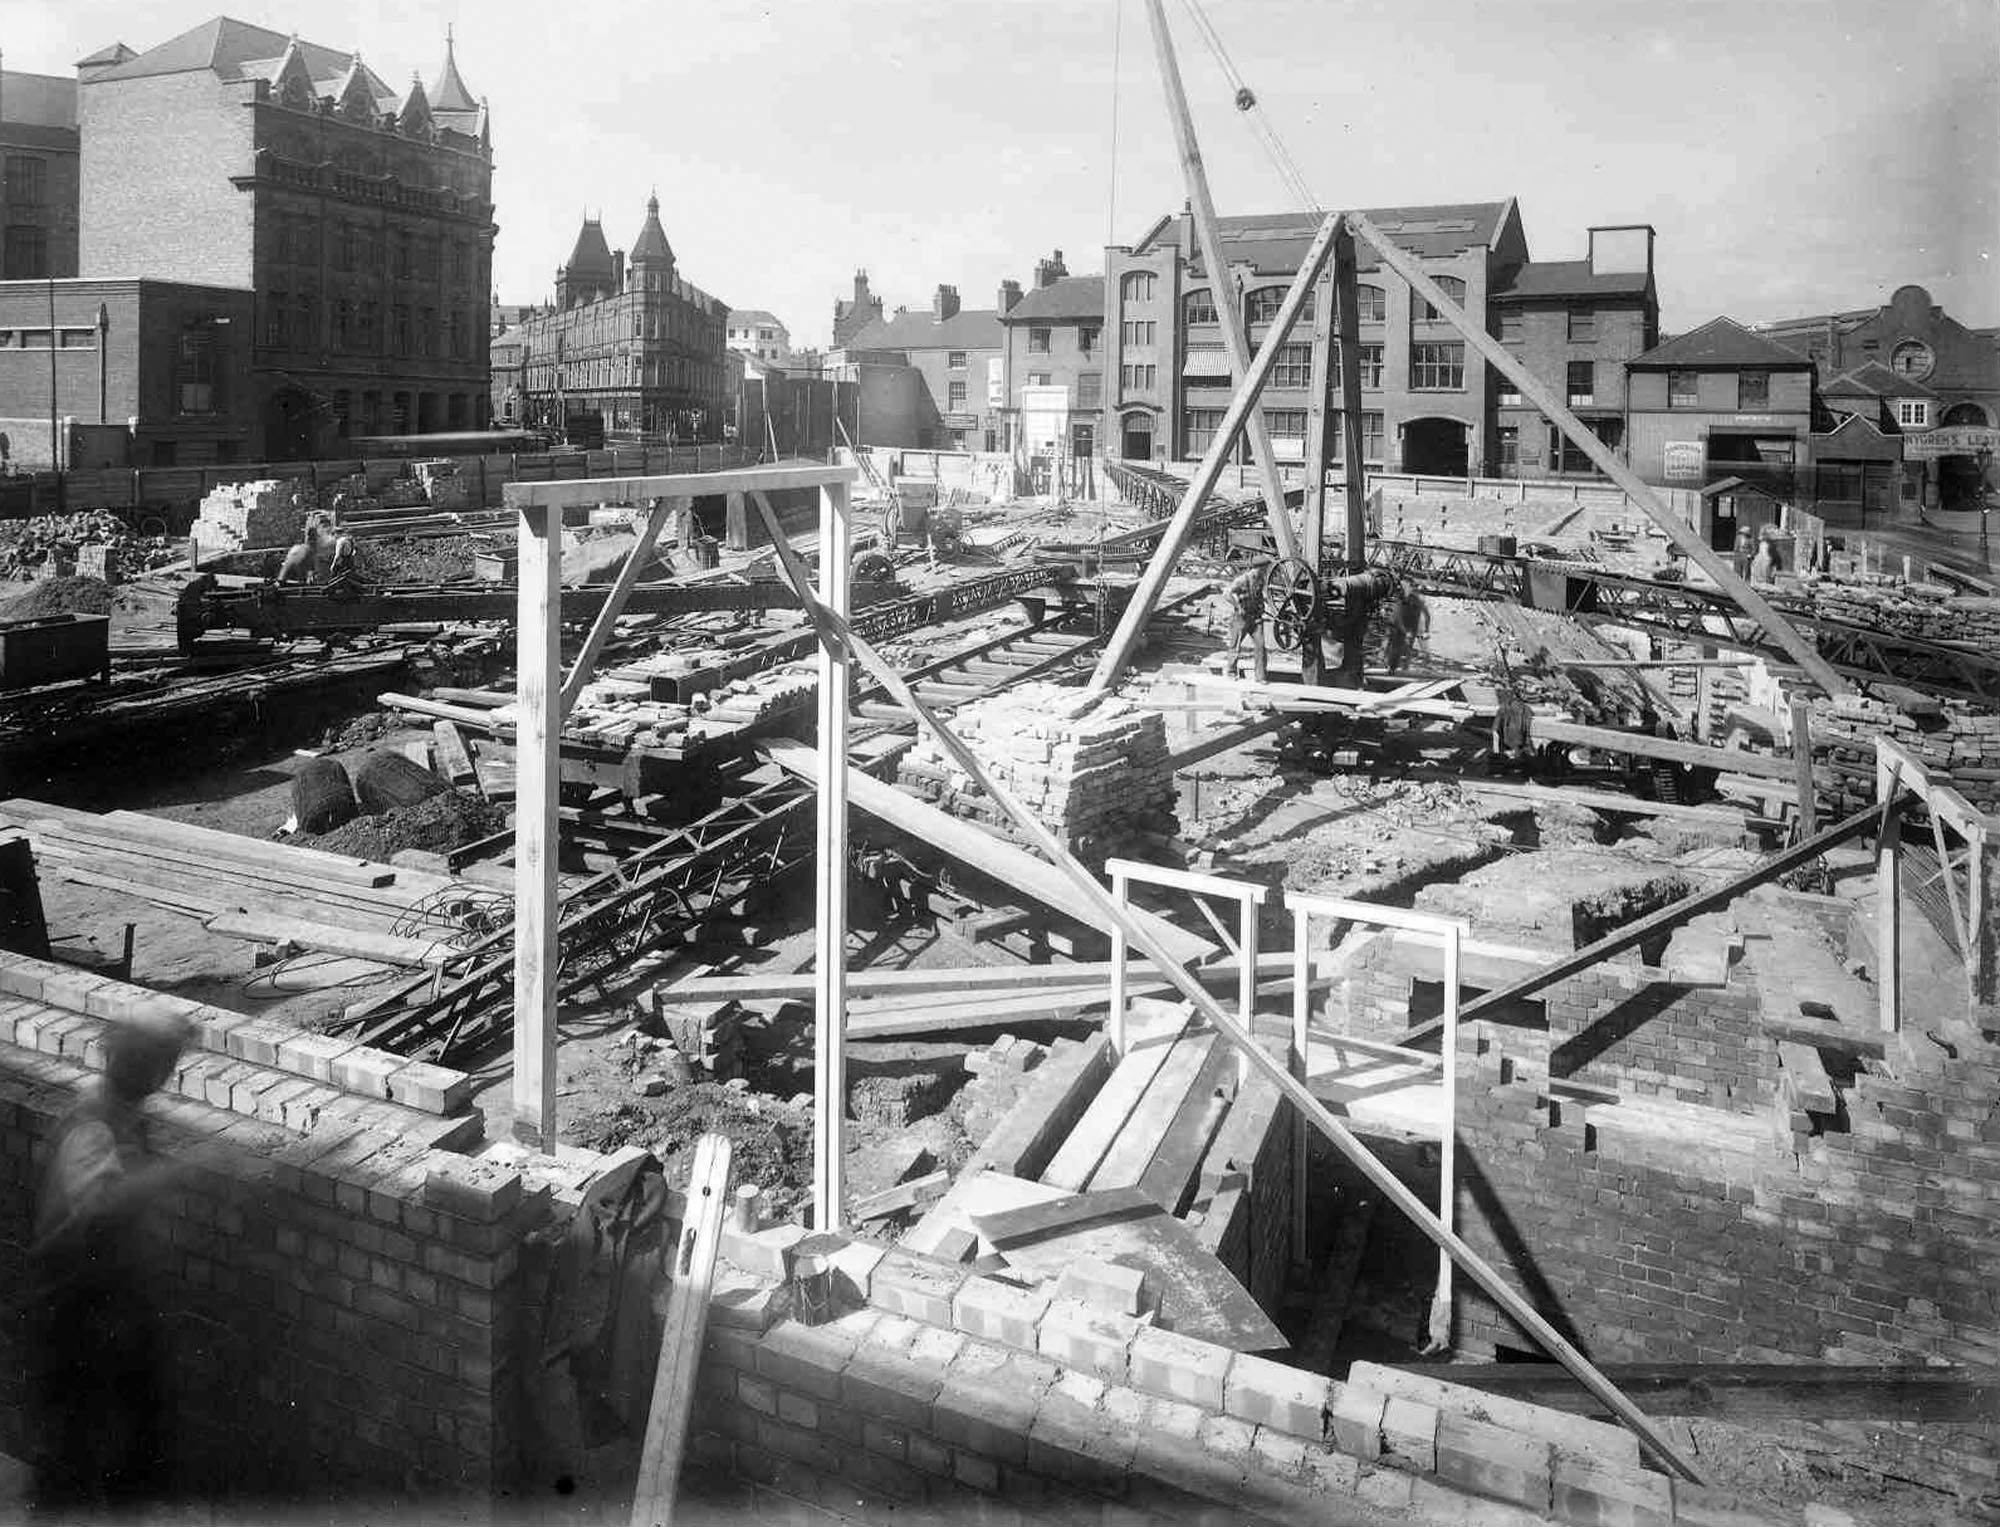 Looking from the rear of the construction site up towards Charles Street, 1937 - Affective Digital Histories, University of Leicester